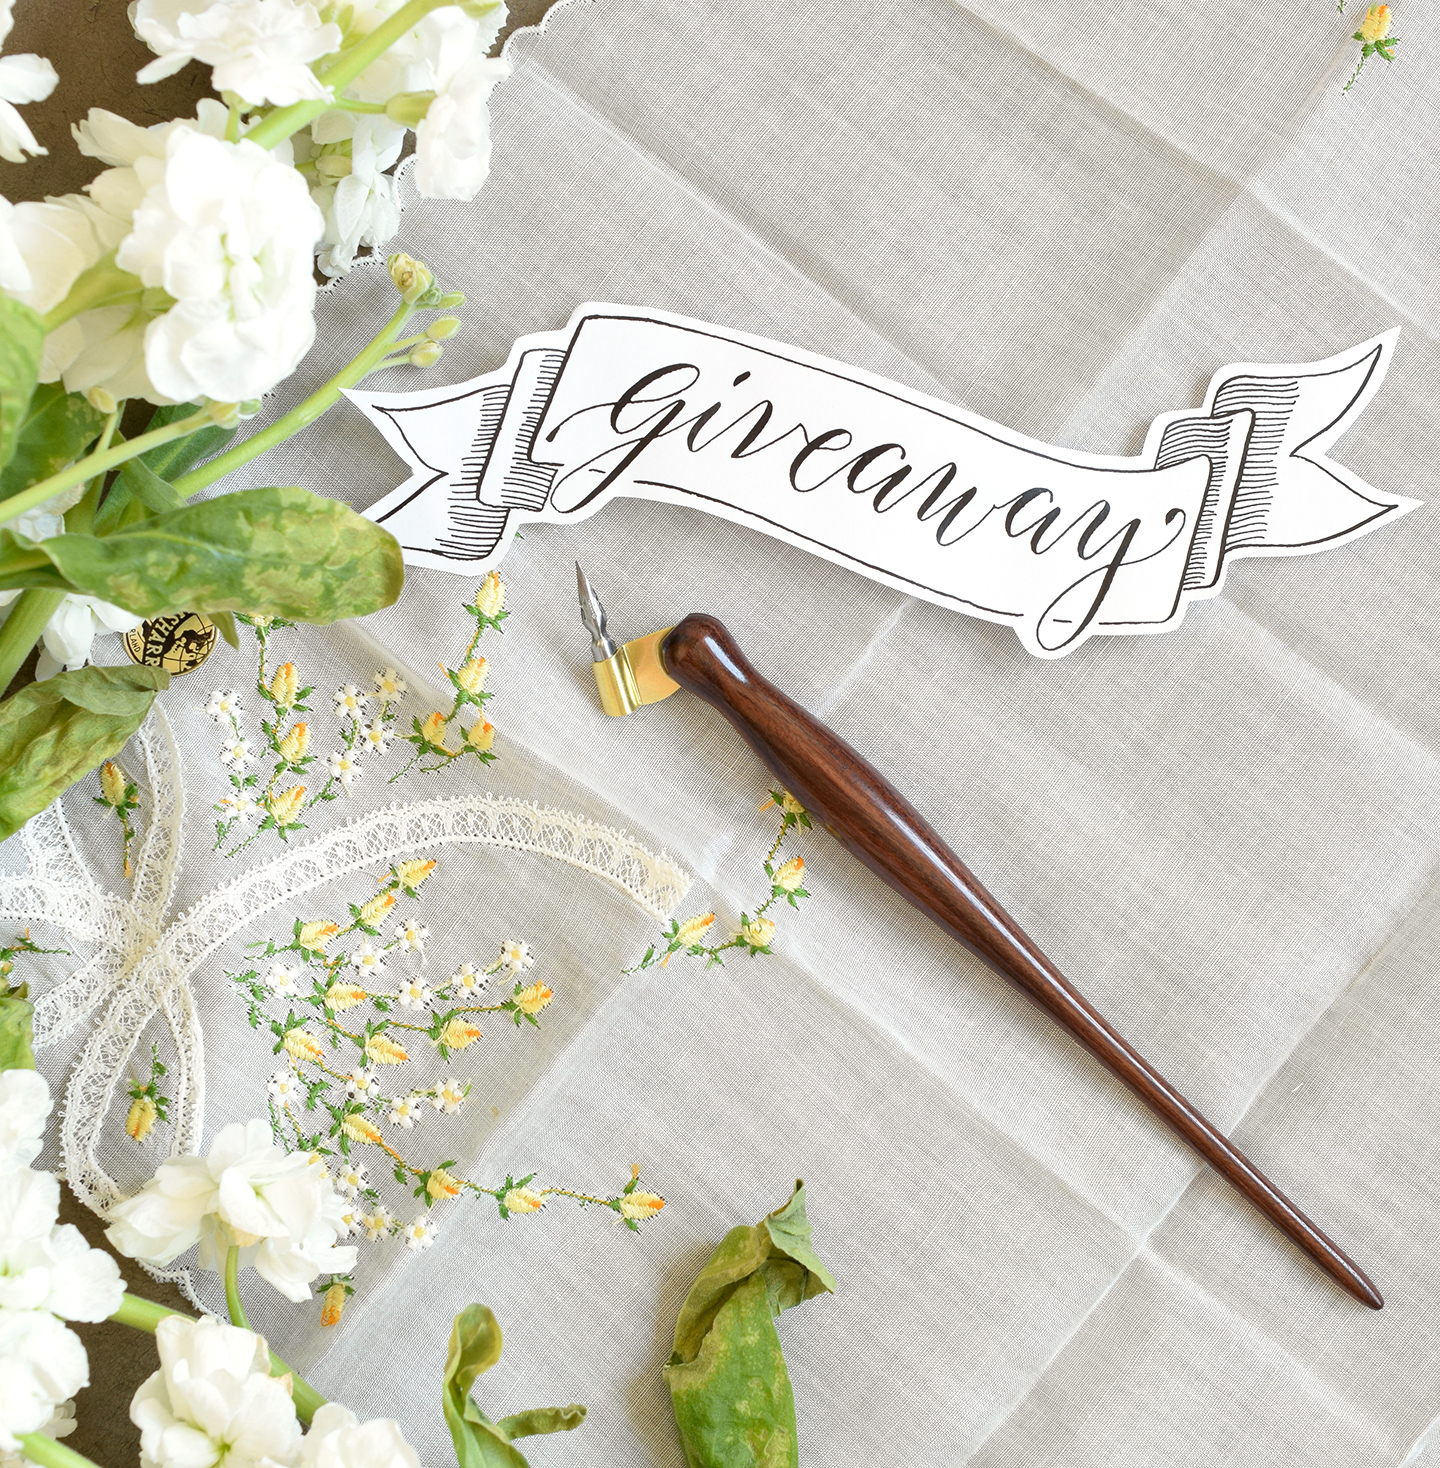 A Holiday Oblique Calligraphy Pen Giveaway!